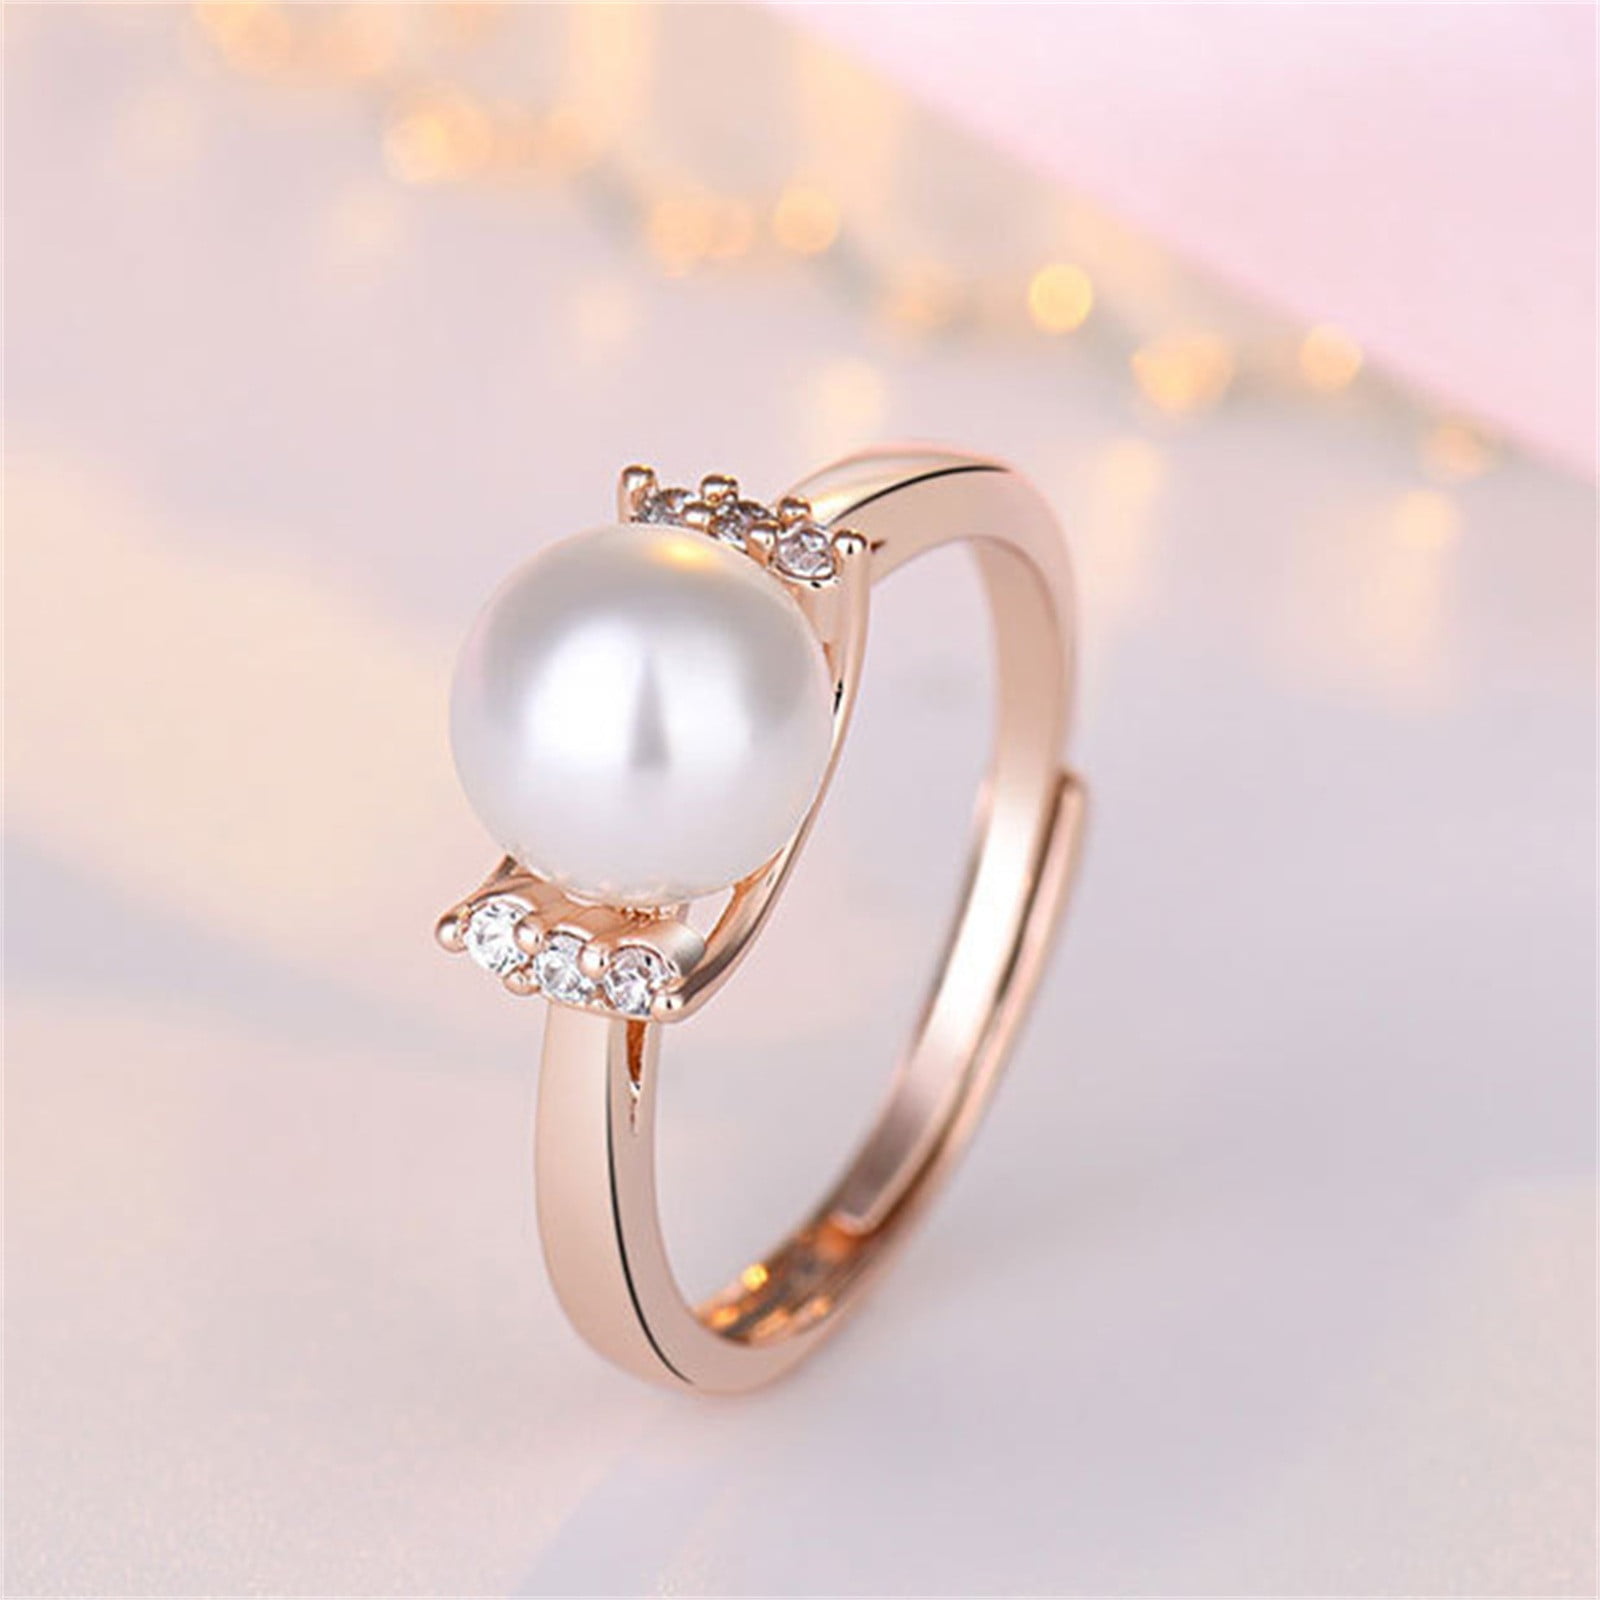 New accessories Original design Natural pearl ring Female S925 sterling  silver Adjustable silver ring Girl's gifts for boy 036 - AliExpress